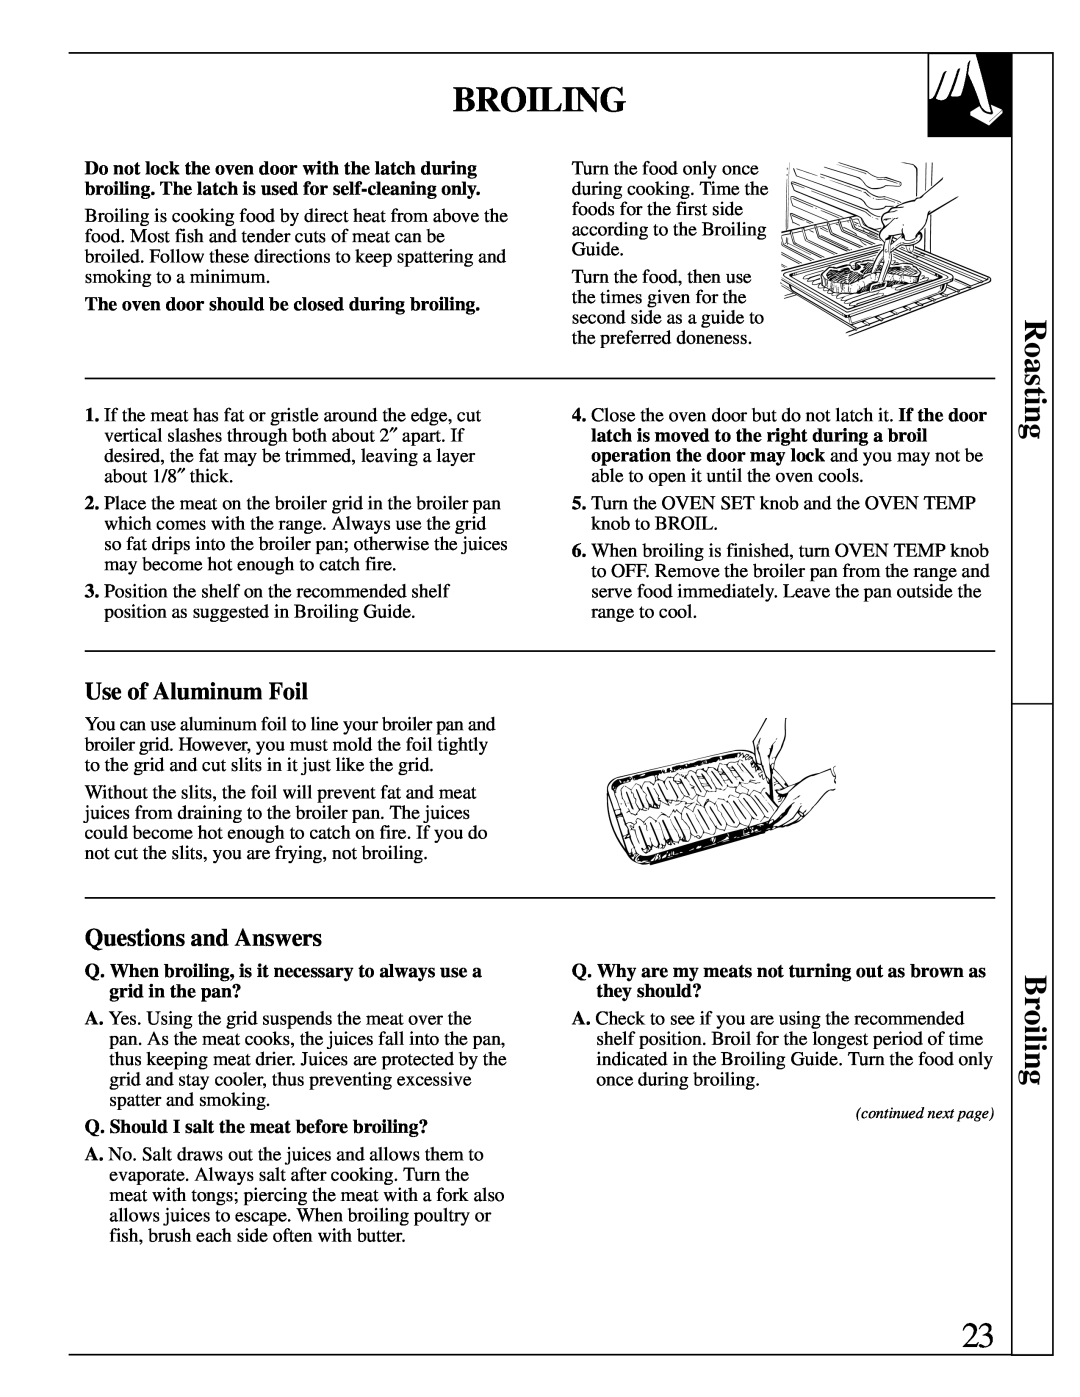 Hotpoint RGB744 installation instructions Broiling, Use of Aluminum Foil, Questions and Answers 